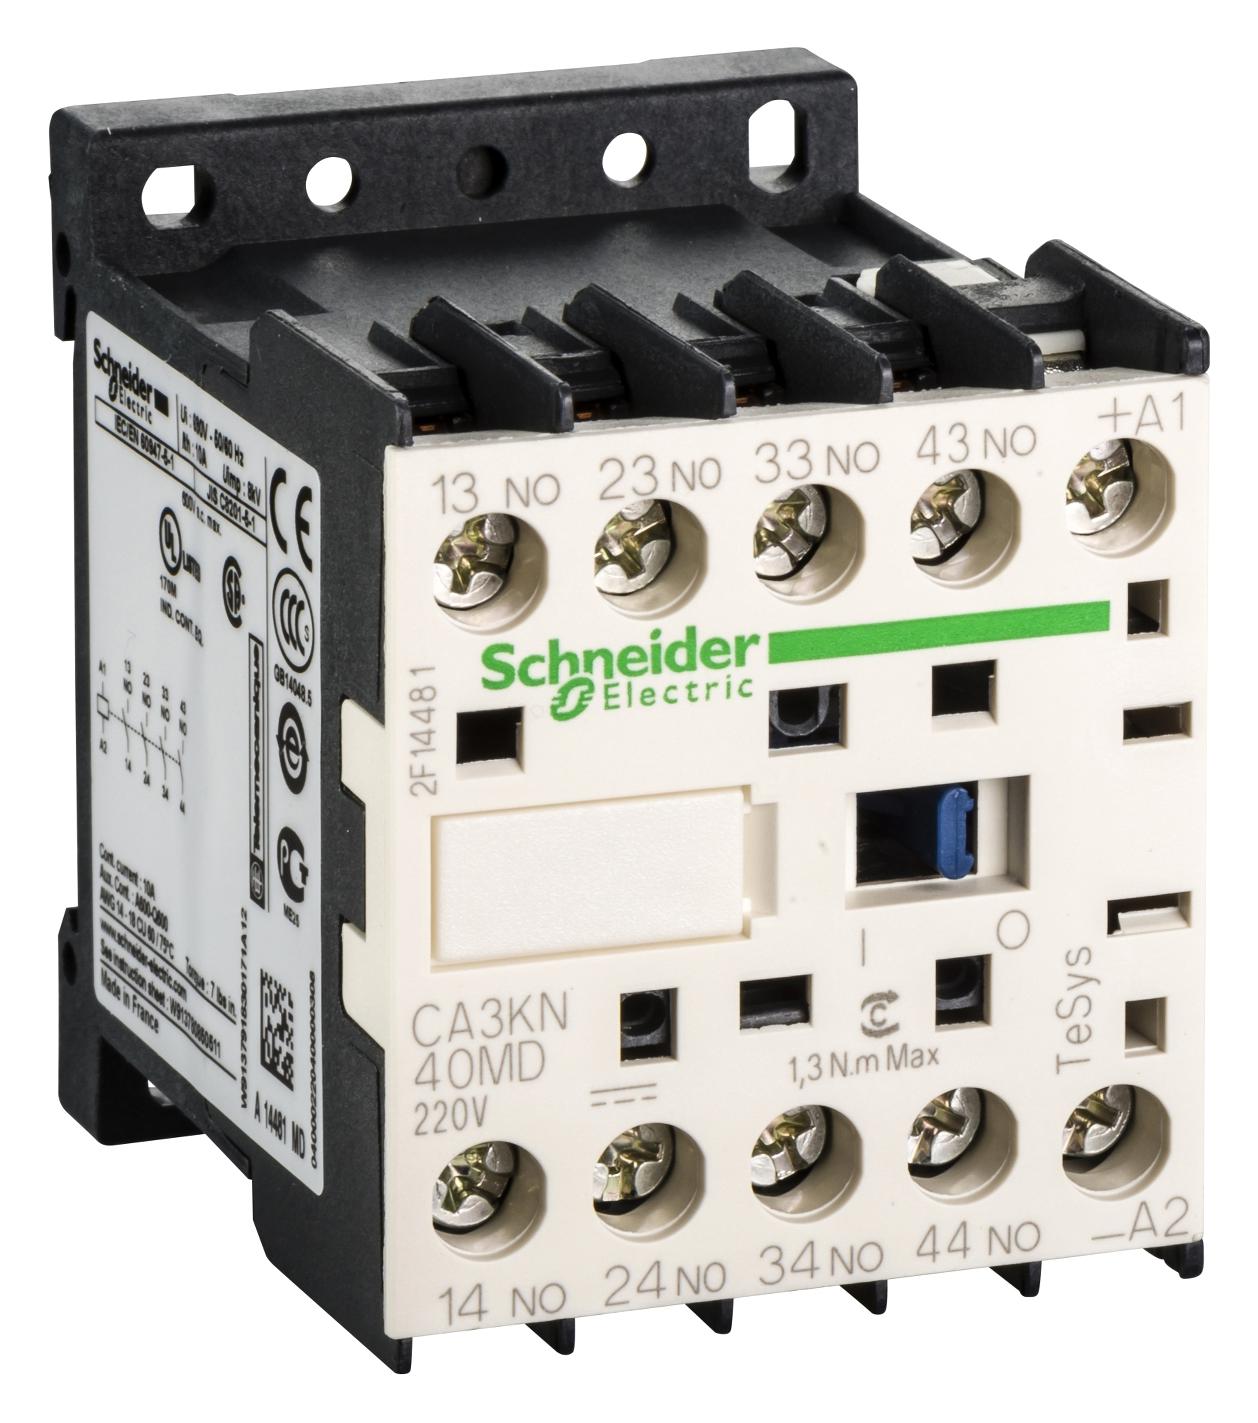 CA3KN40MD CONTROL RELAY 4NO CONTACTS SCHNEIDER ELECTRIC